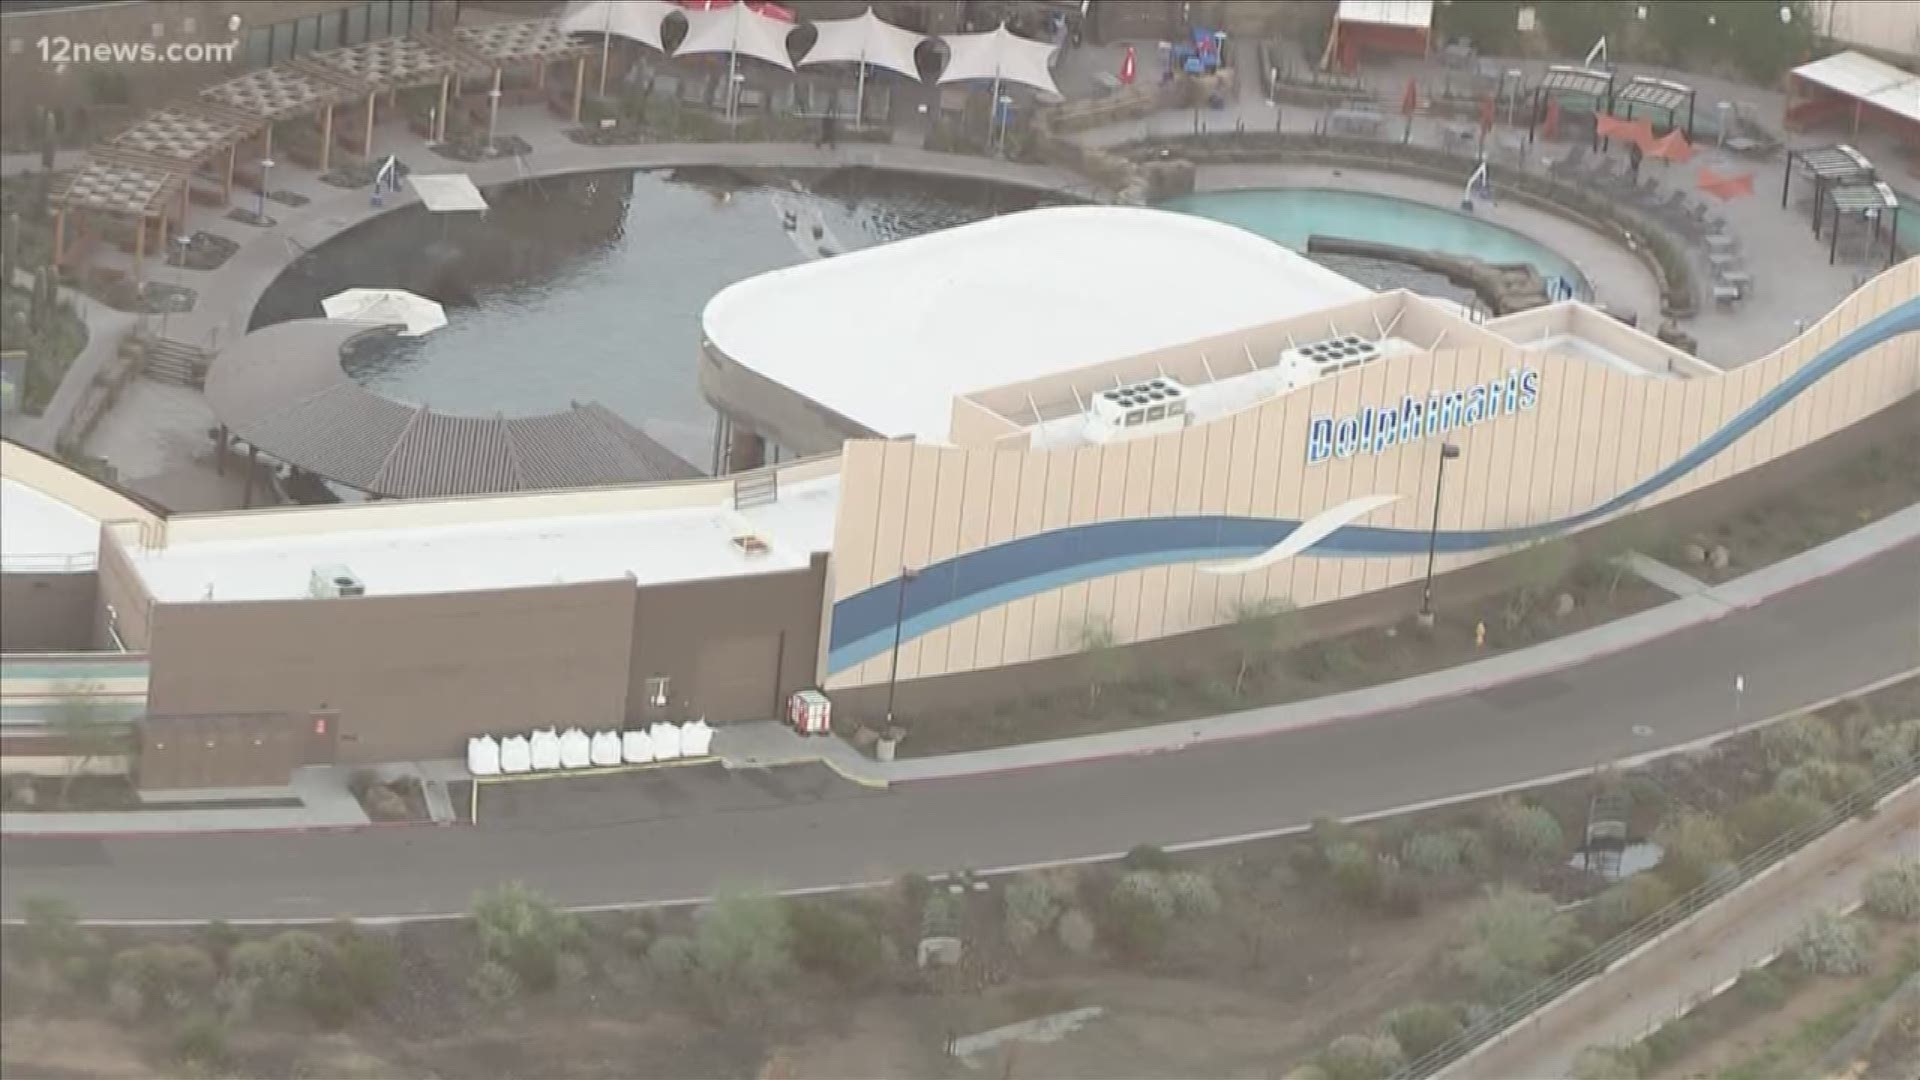 Dolphinaris said it will share future plans for the facility when they know more.